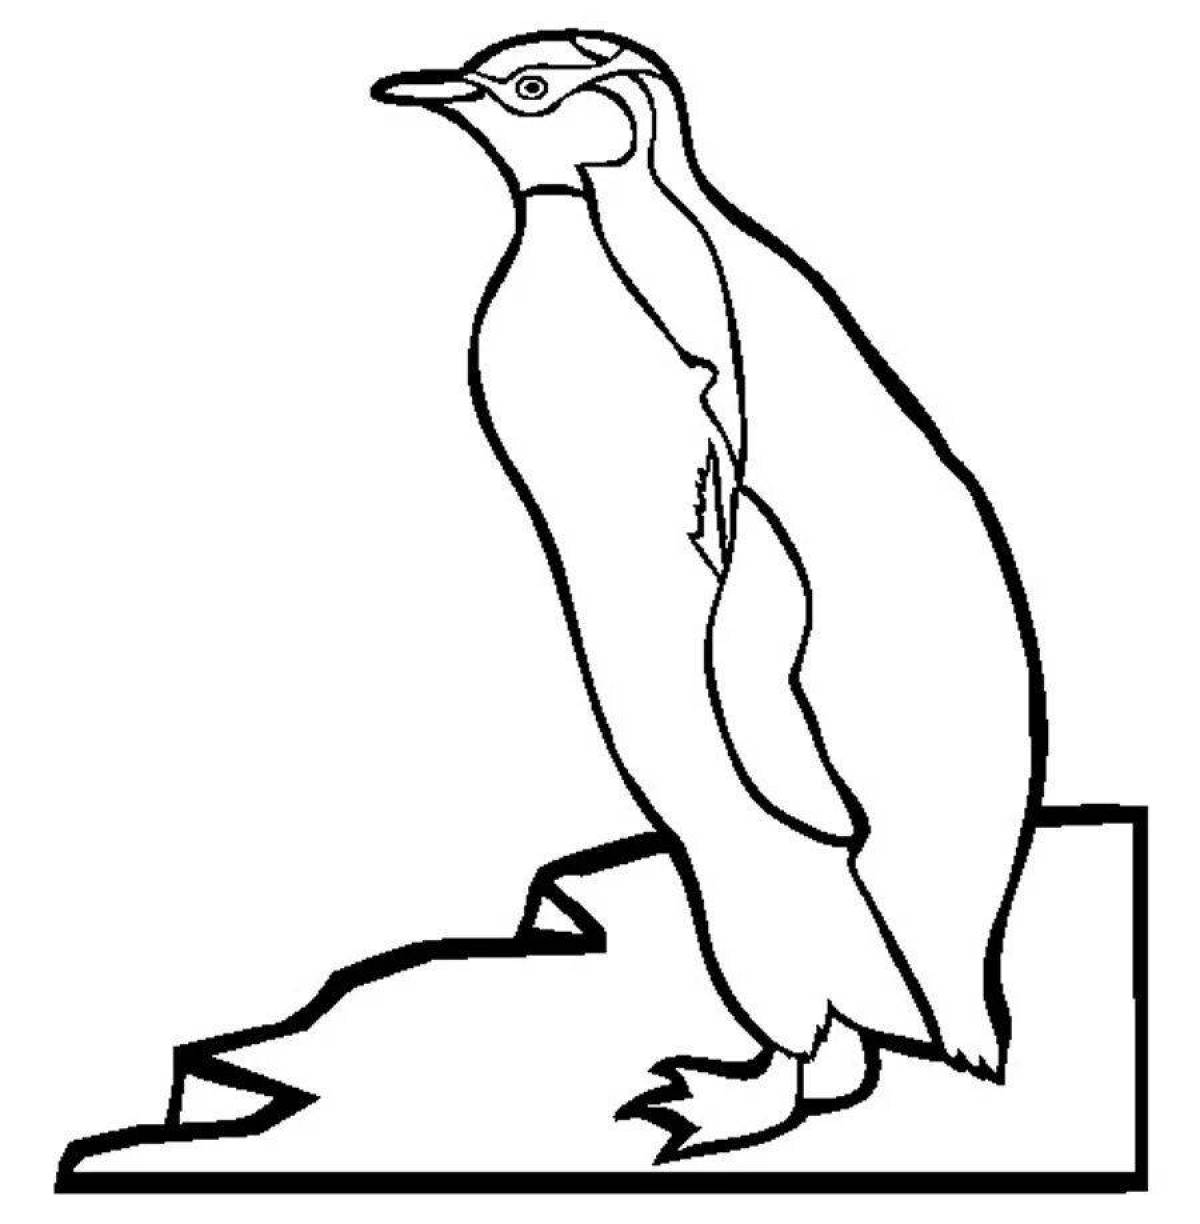 Coloring book animated penguin on ice